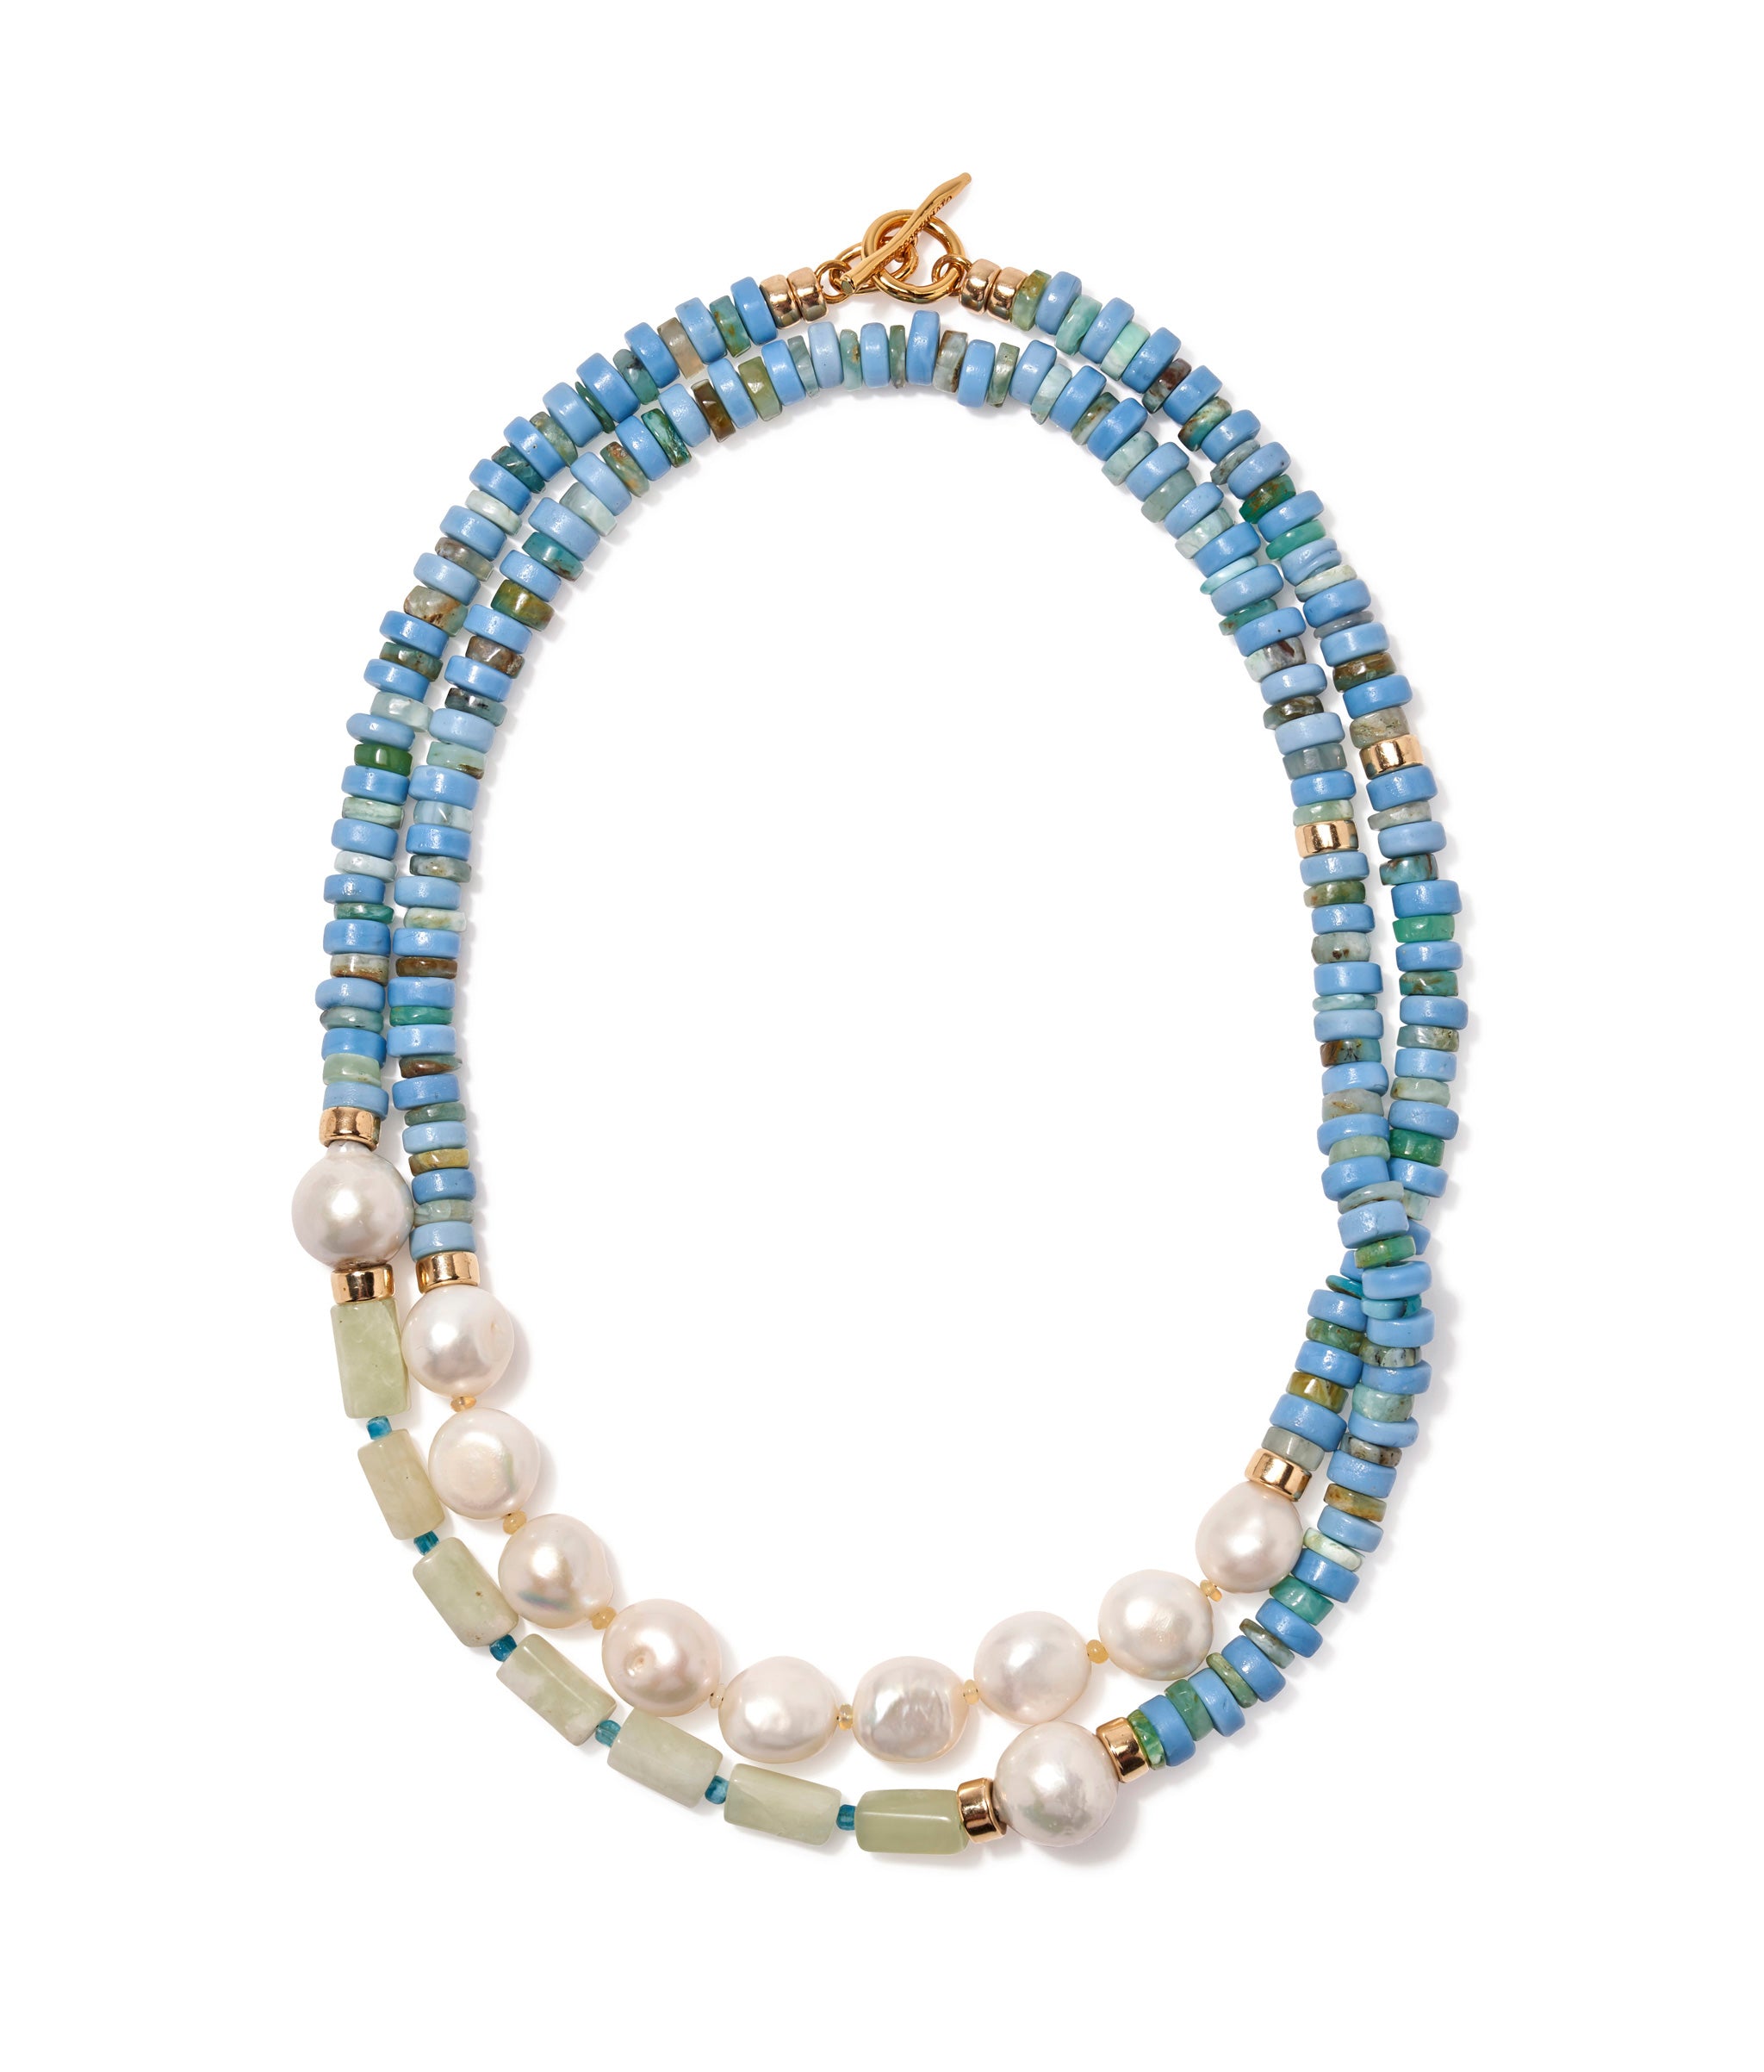 Cabana Necklace in Wave. Wrapped around twice for a collar affect.